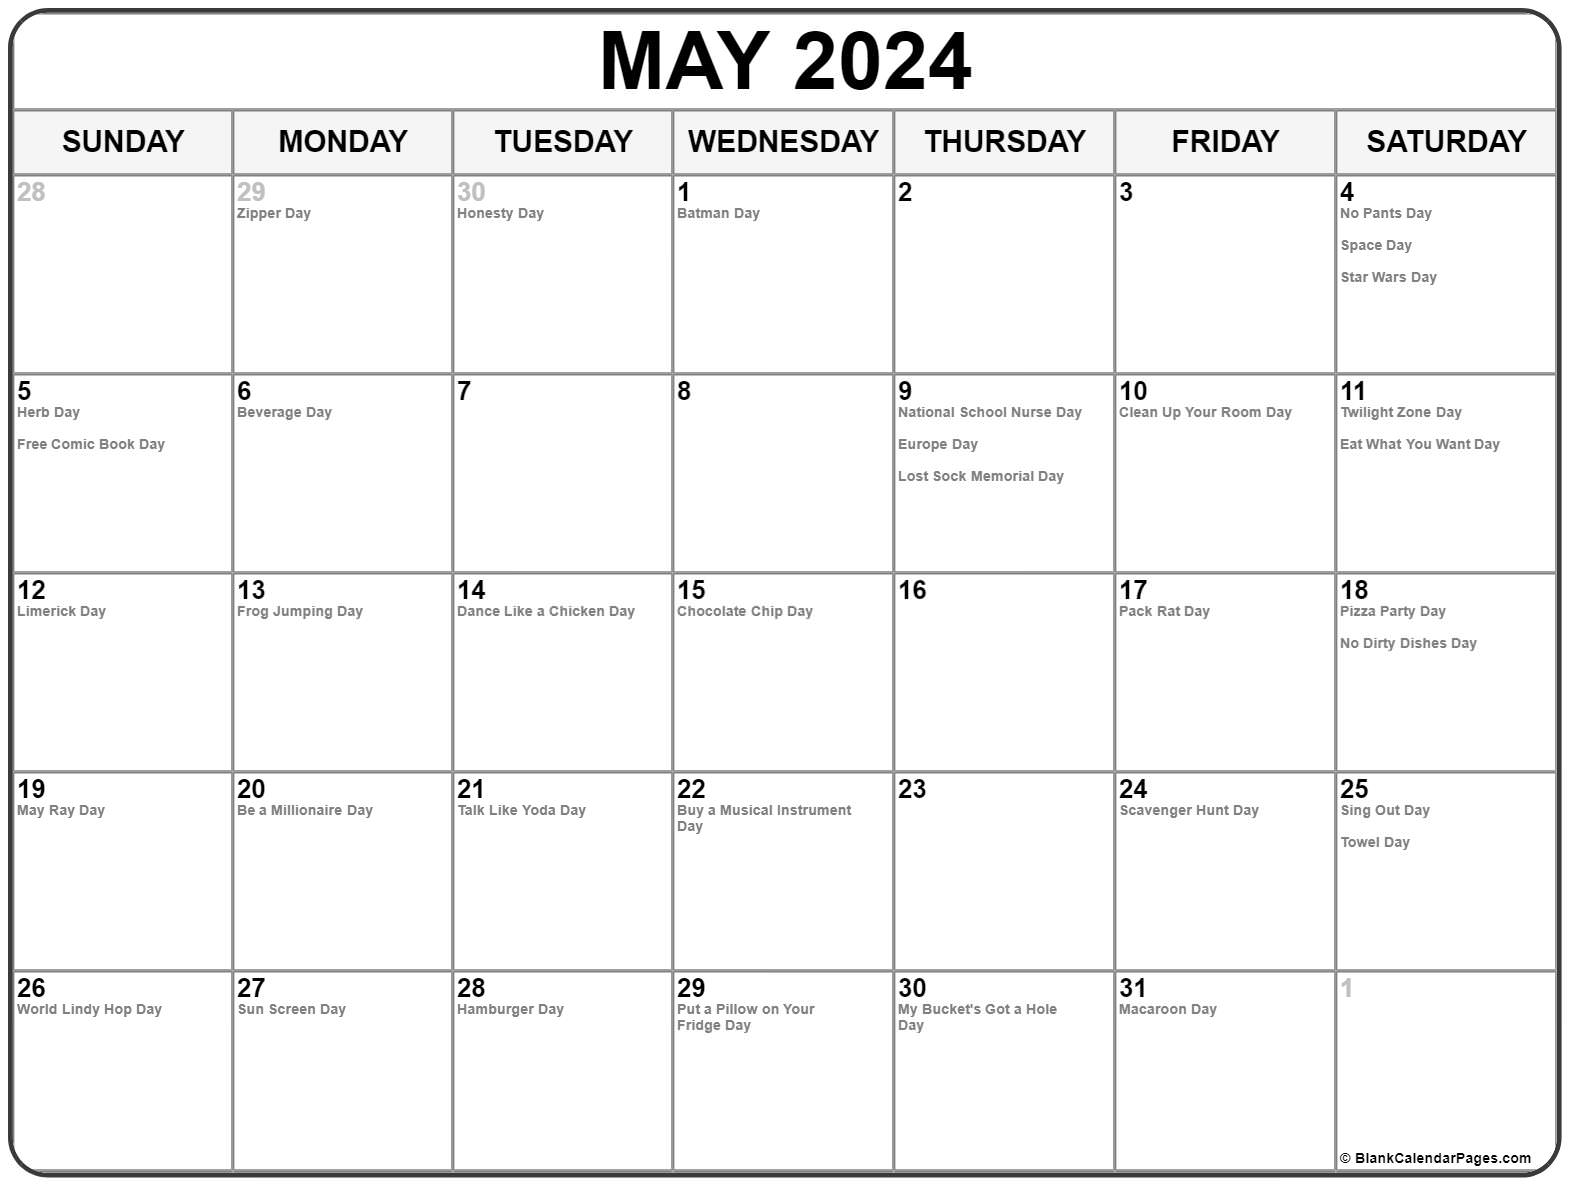 2023 Holidays In May - Get Calendar 2023 Update